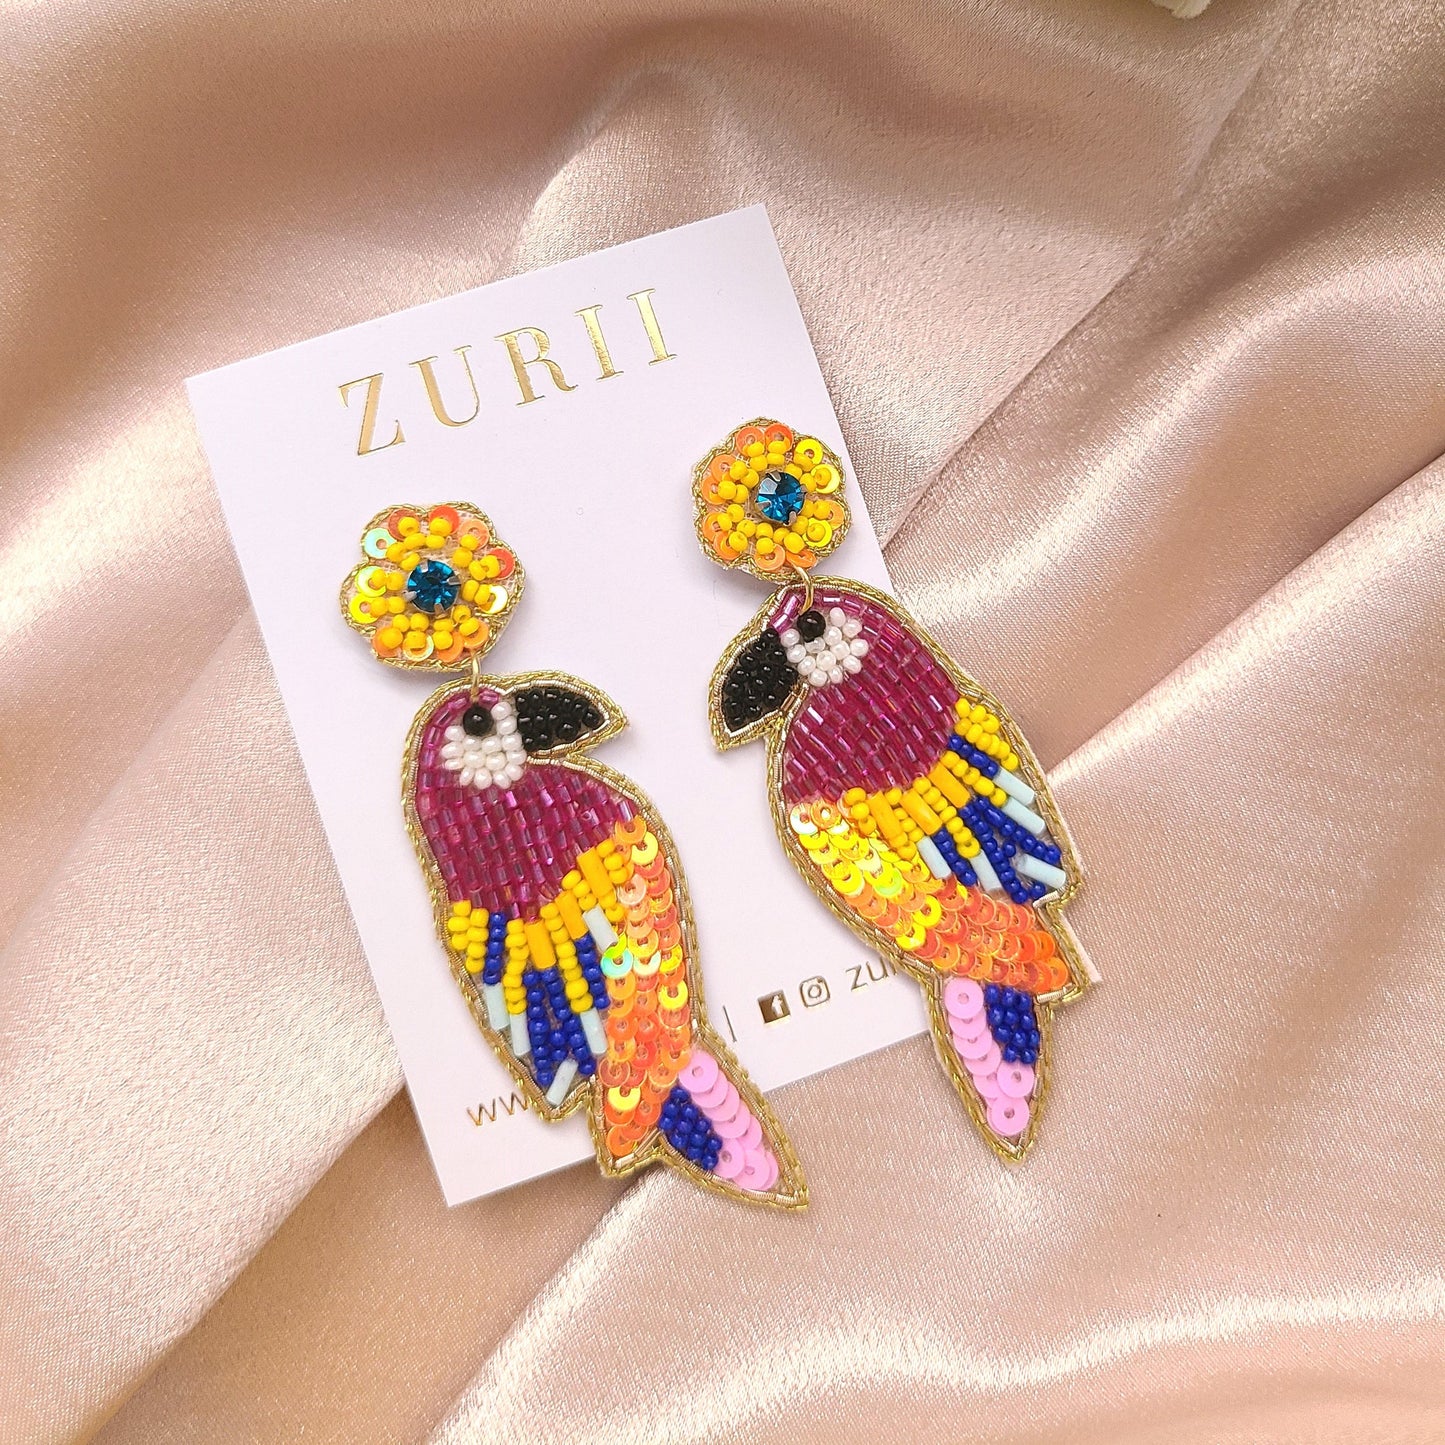 Collection of embroidery earrings-Zurii